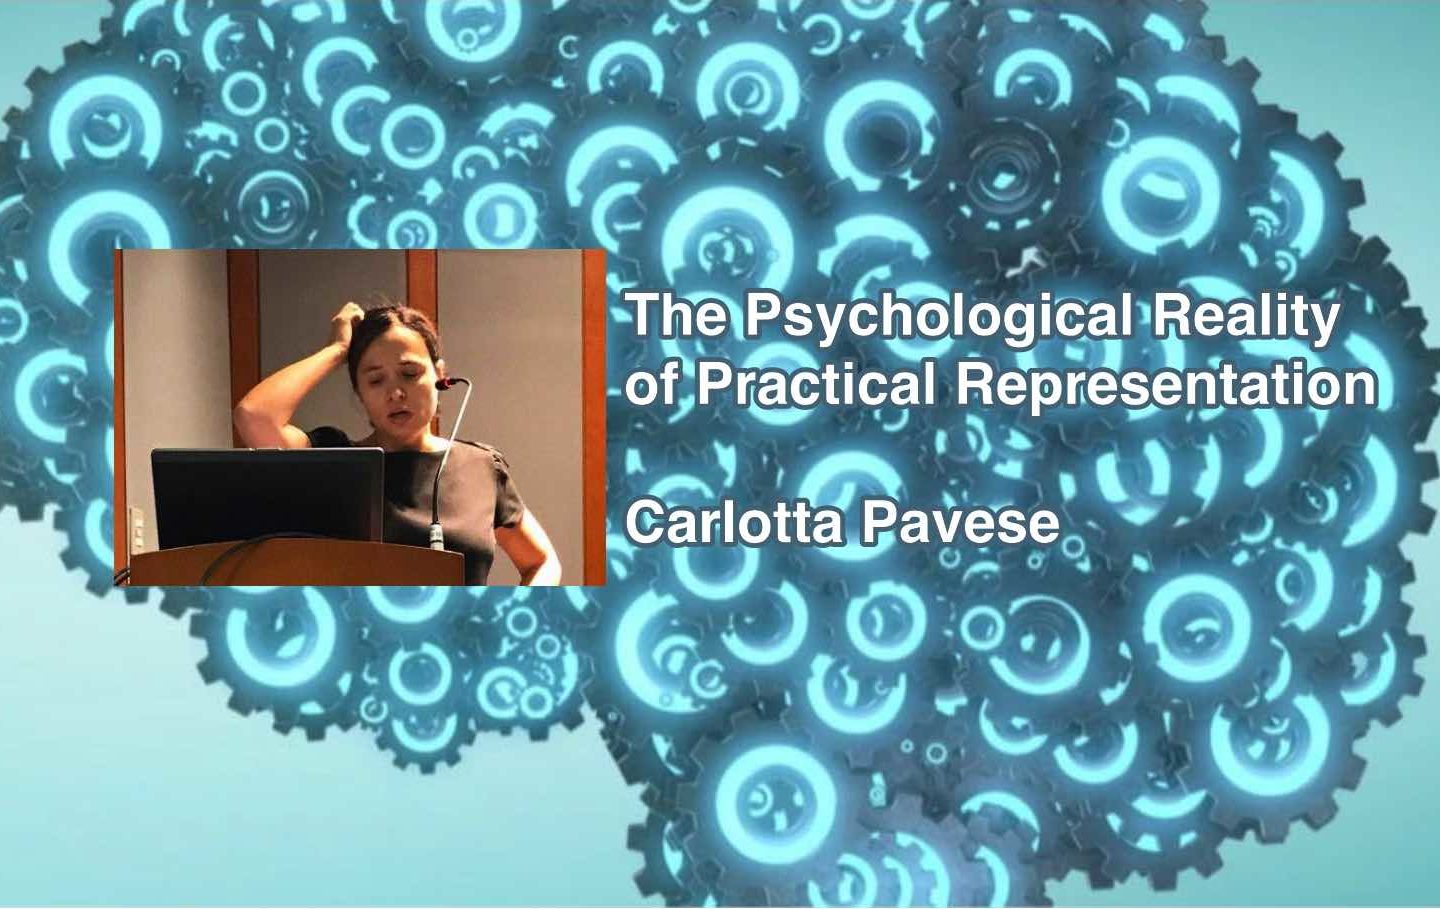 Carlotta Pavese on The Psychological Reality of Practical Representation